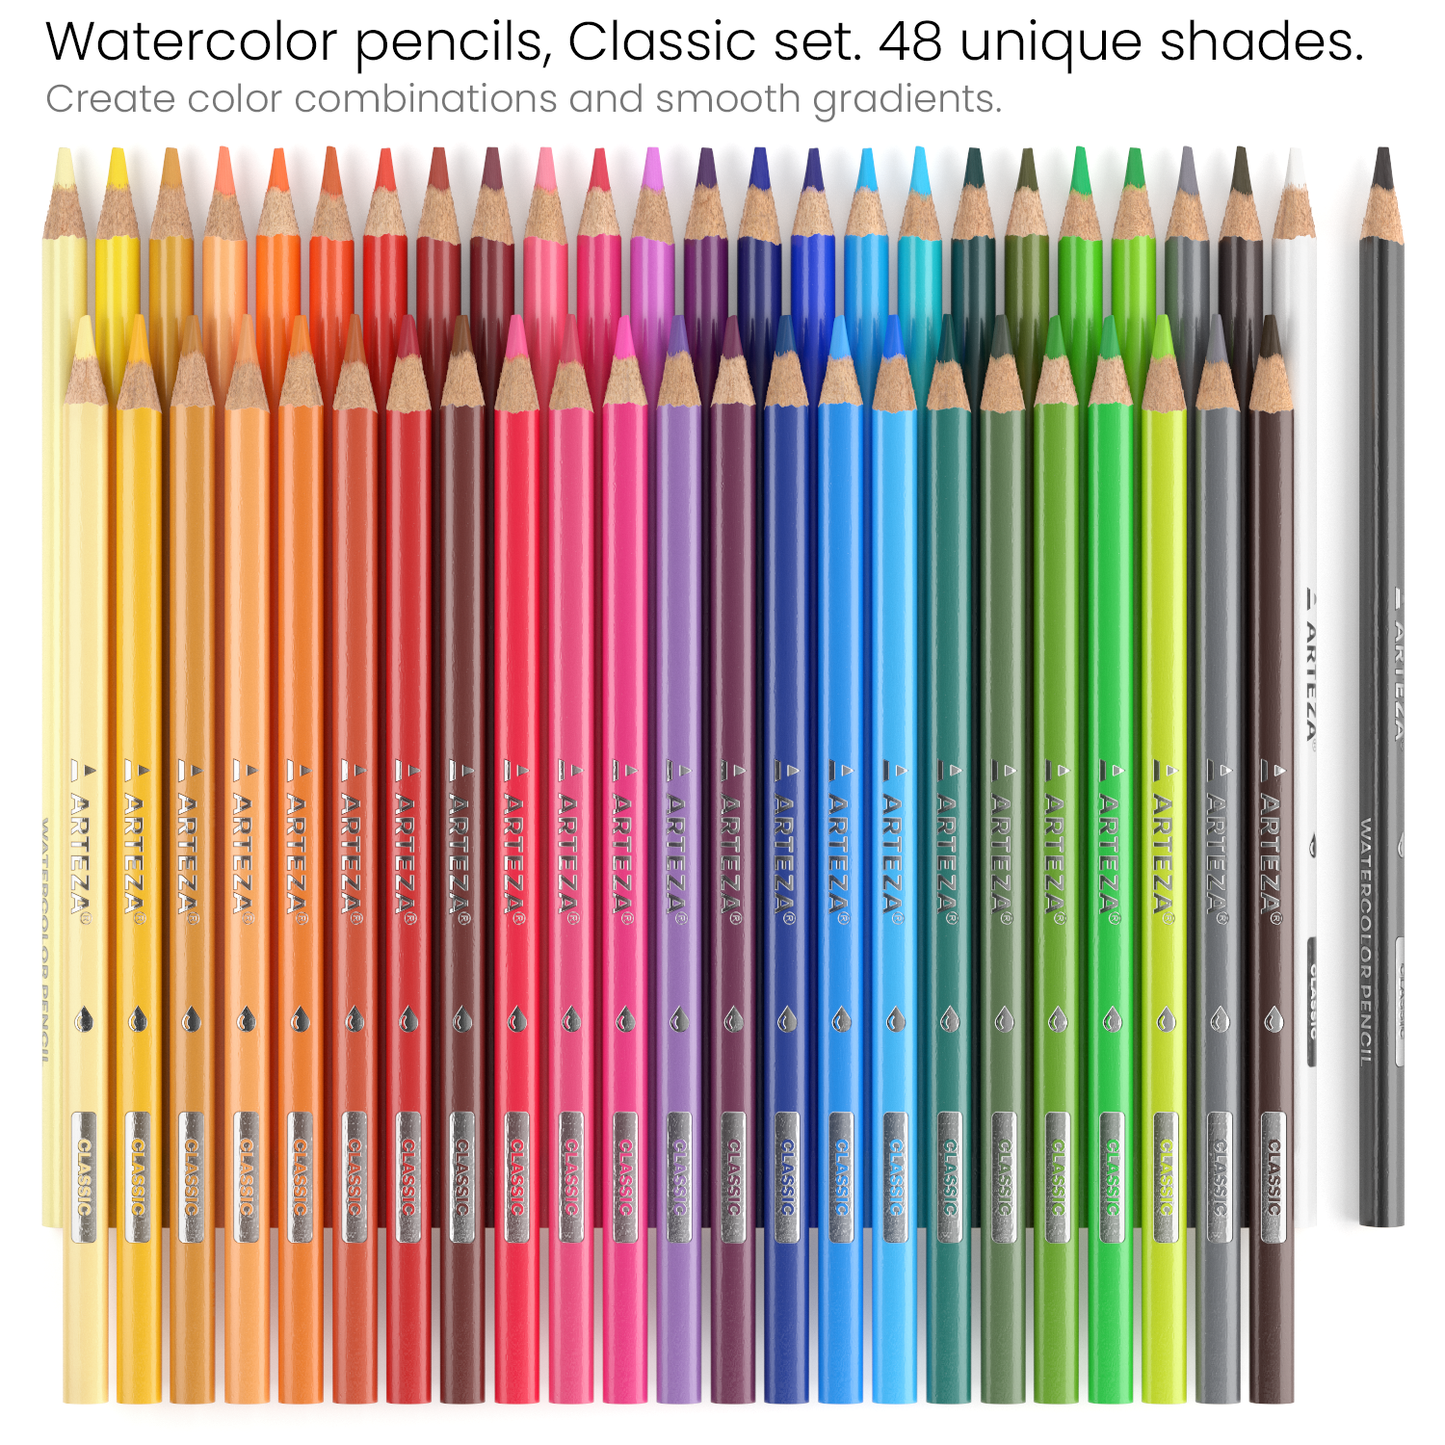 Watercolor Pencils, Triangle Shaped - Set of 48